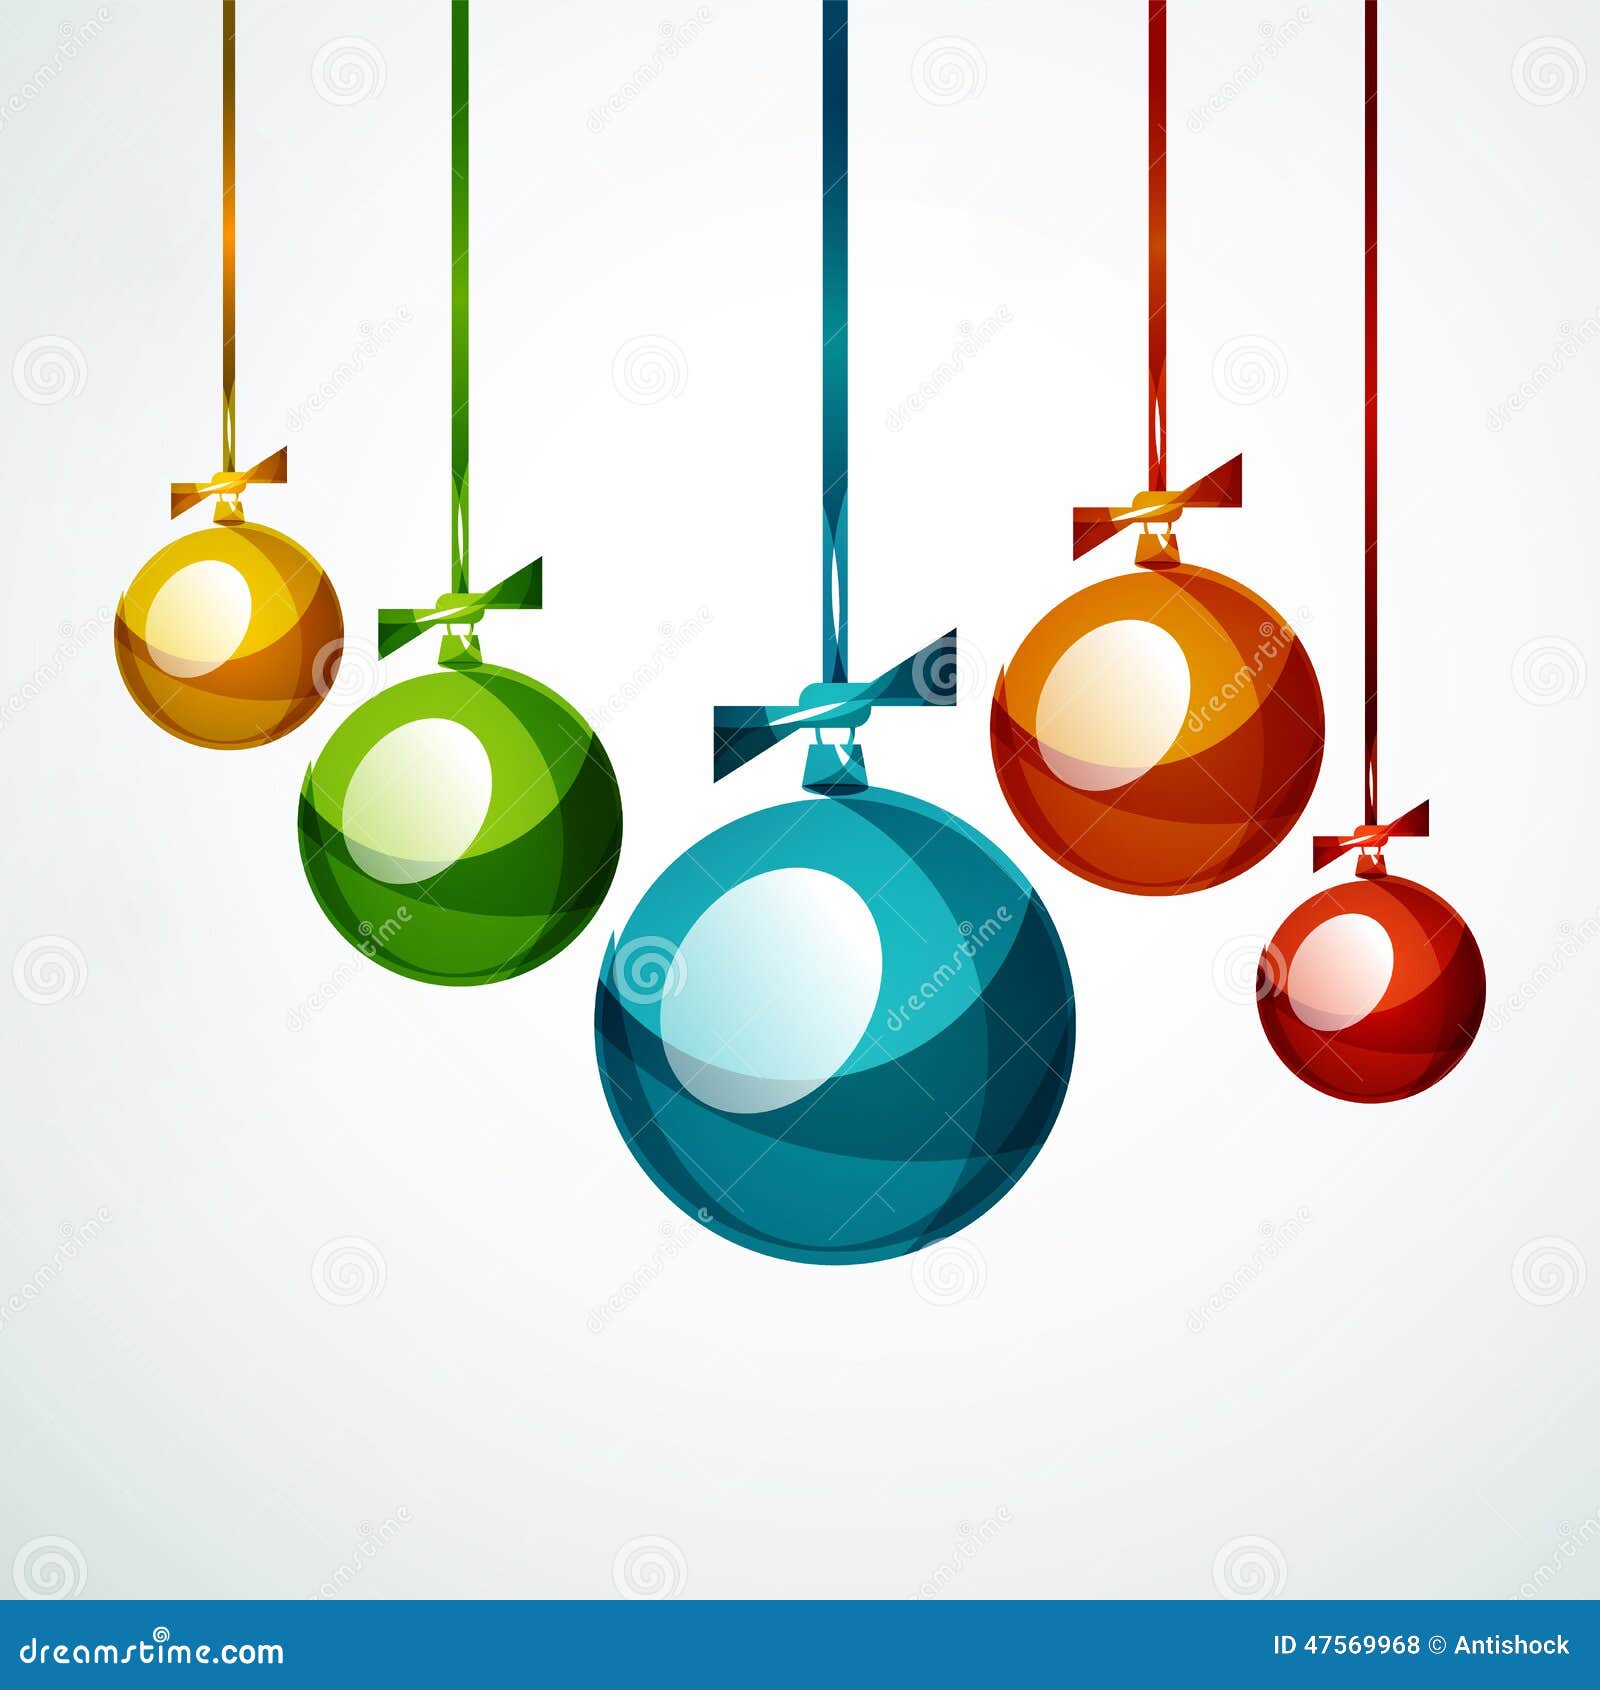 christmas ball, bauble, new year concept